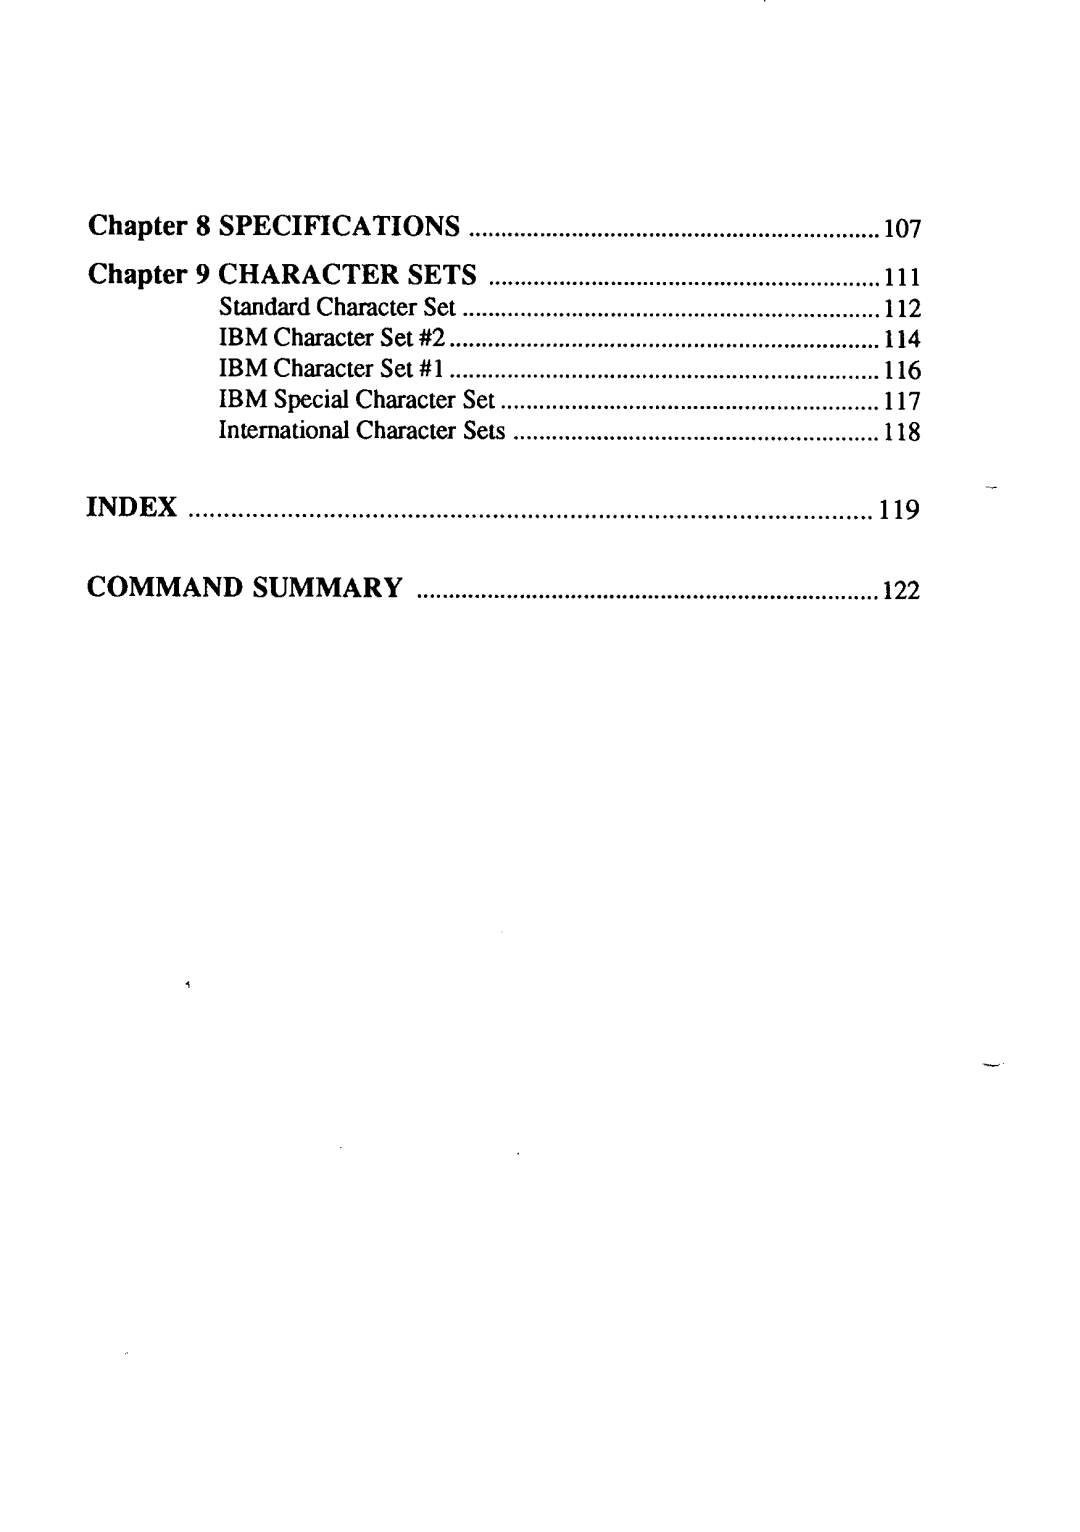 Star Micronics LC24-15 user manual Chapter, Index, Specifications, Character Sets 